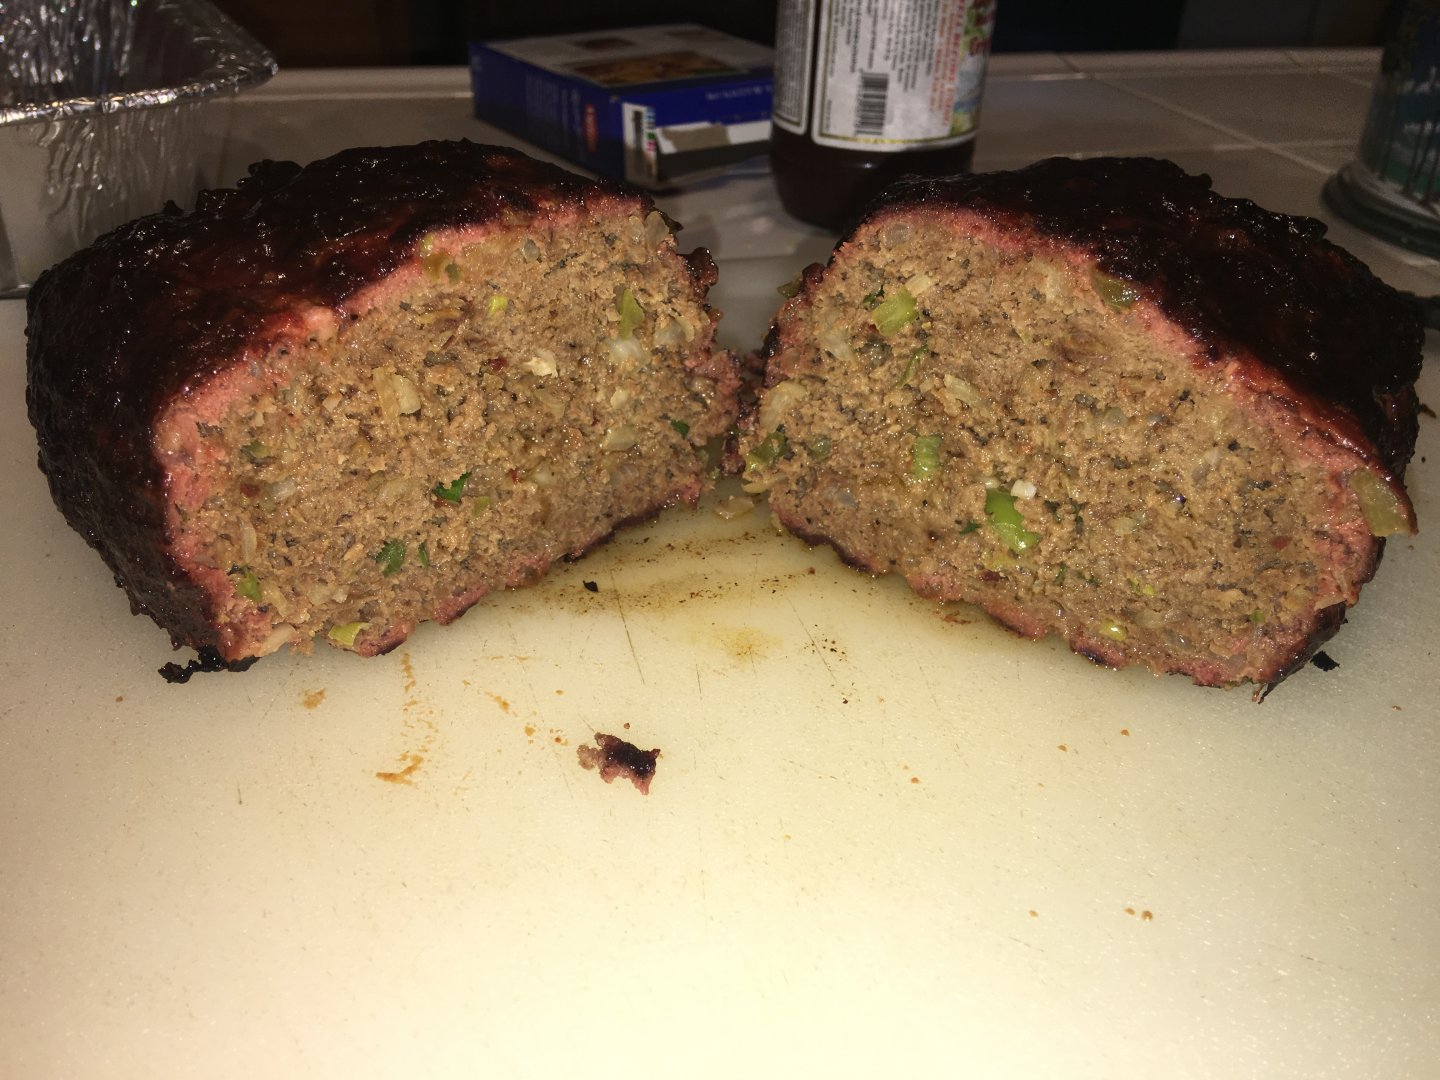 How Long To Cook A 2 Pound Meatloaf At 325 Degrees : 2 Lb Meatloaf At 325 : How To Make Meatloaf From Scratch ... / .fully cooked ham that directs me to cook at 325 degrees f for 20 minutes per pound (ham is 3.38#) and i want to heat it through at a 200 degree f temp.